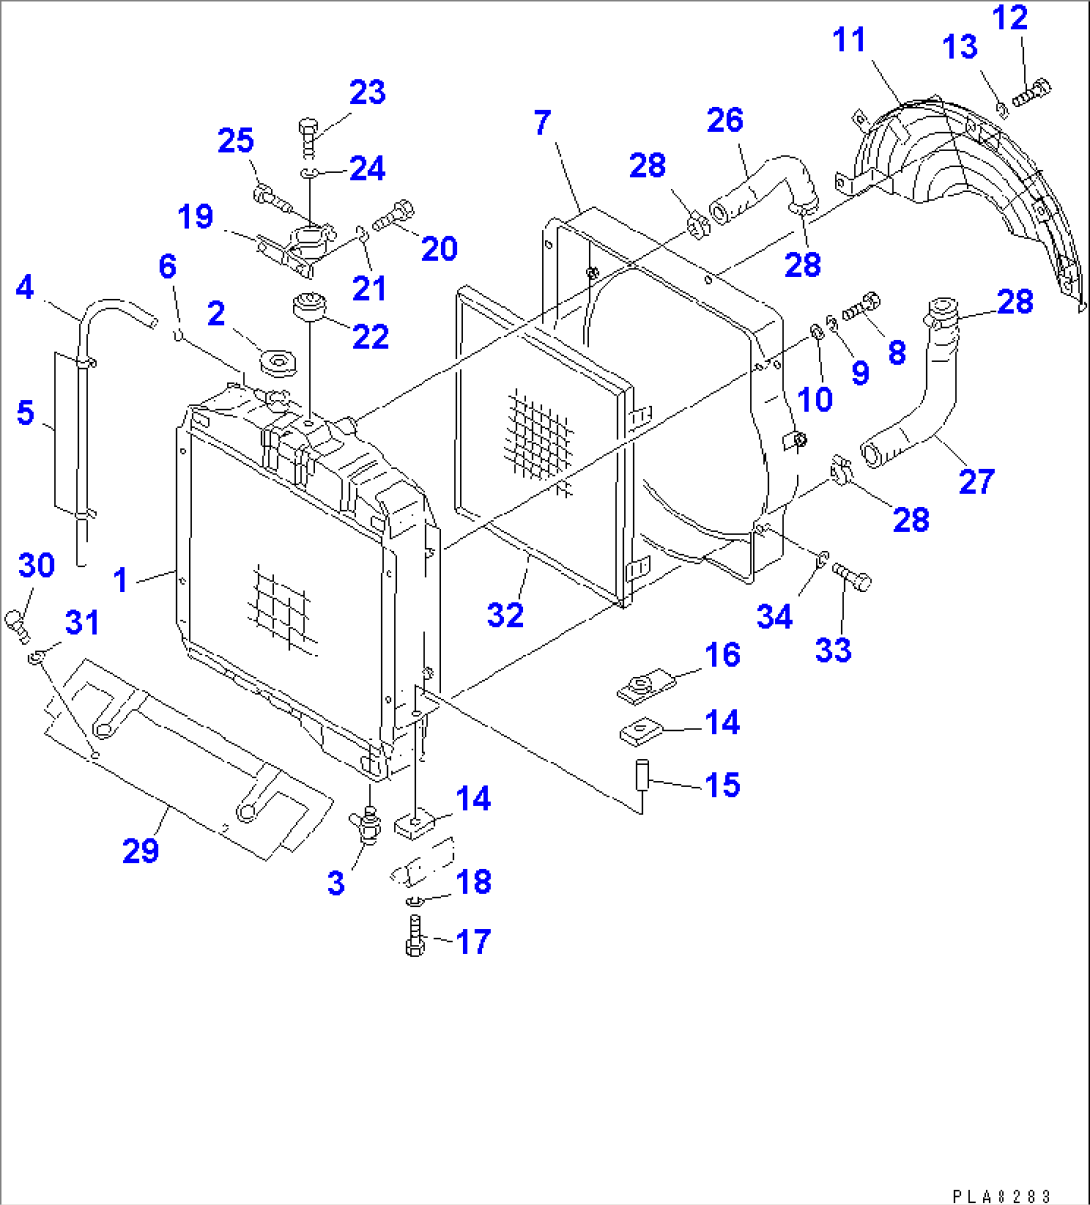 RADIATOR AND PIPING (WITH SANDY DUSTY PROTECTION GRID) (FOR SHIP